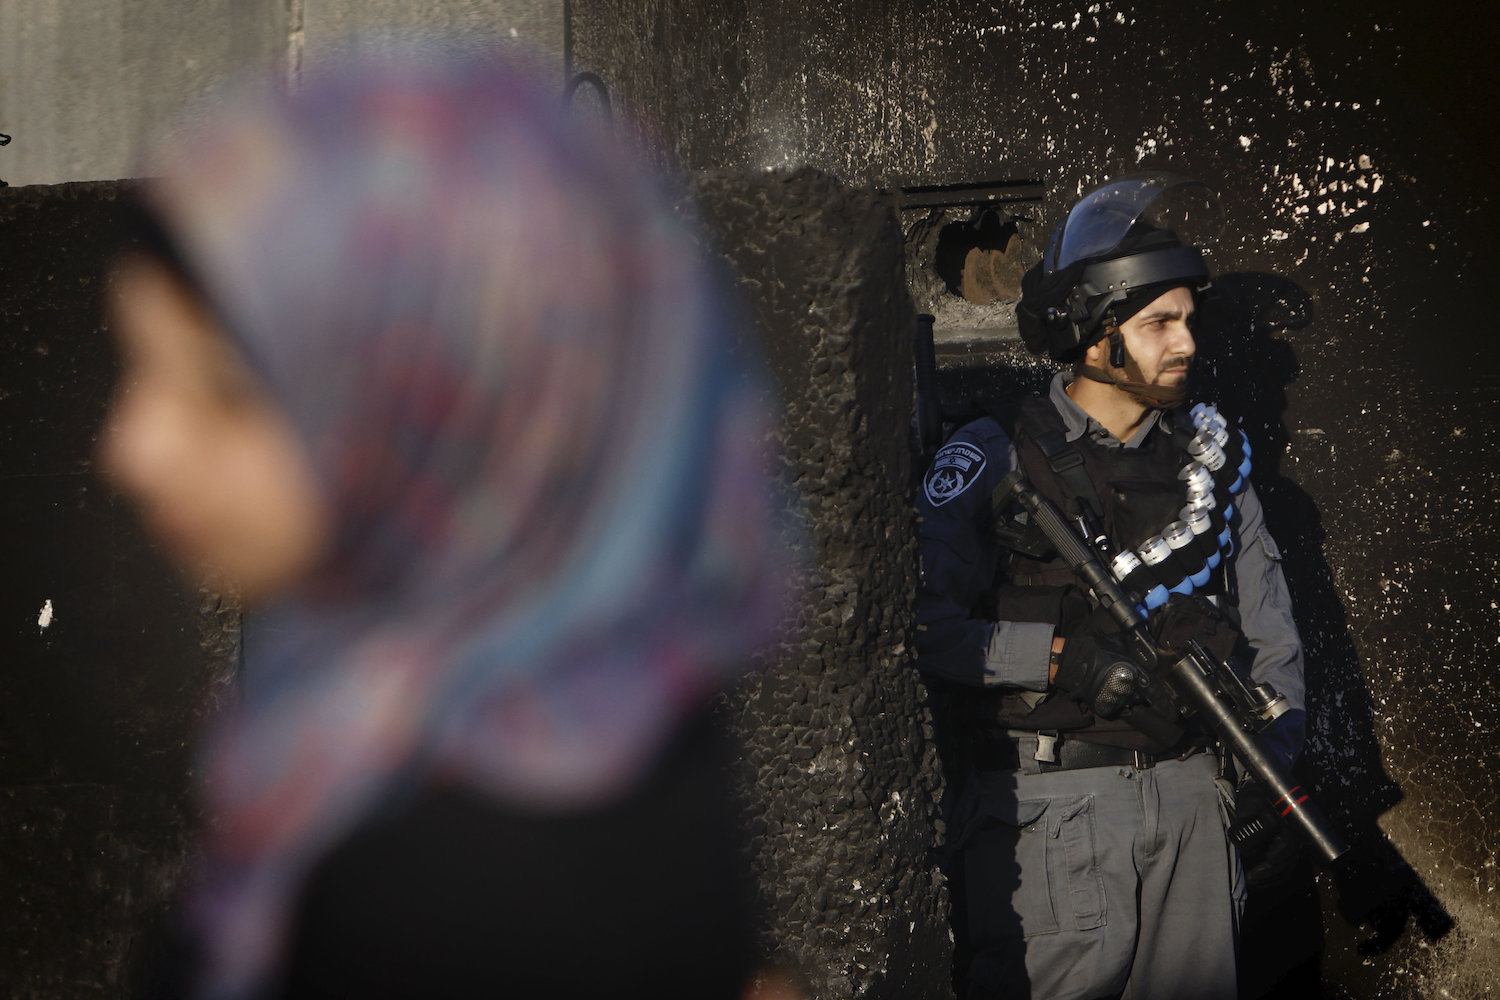 An Israeli soldier stands guard at the Qalandiya checkpoint on the outskirts of the West Bank city of Ramallah as a Palestinian woman waits to cross the checkpoint to head to Jerusalem, July 04, 2014. (Miriam Alster/Flash90)